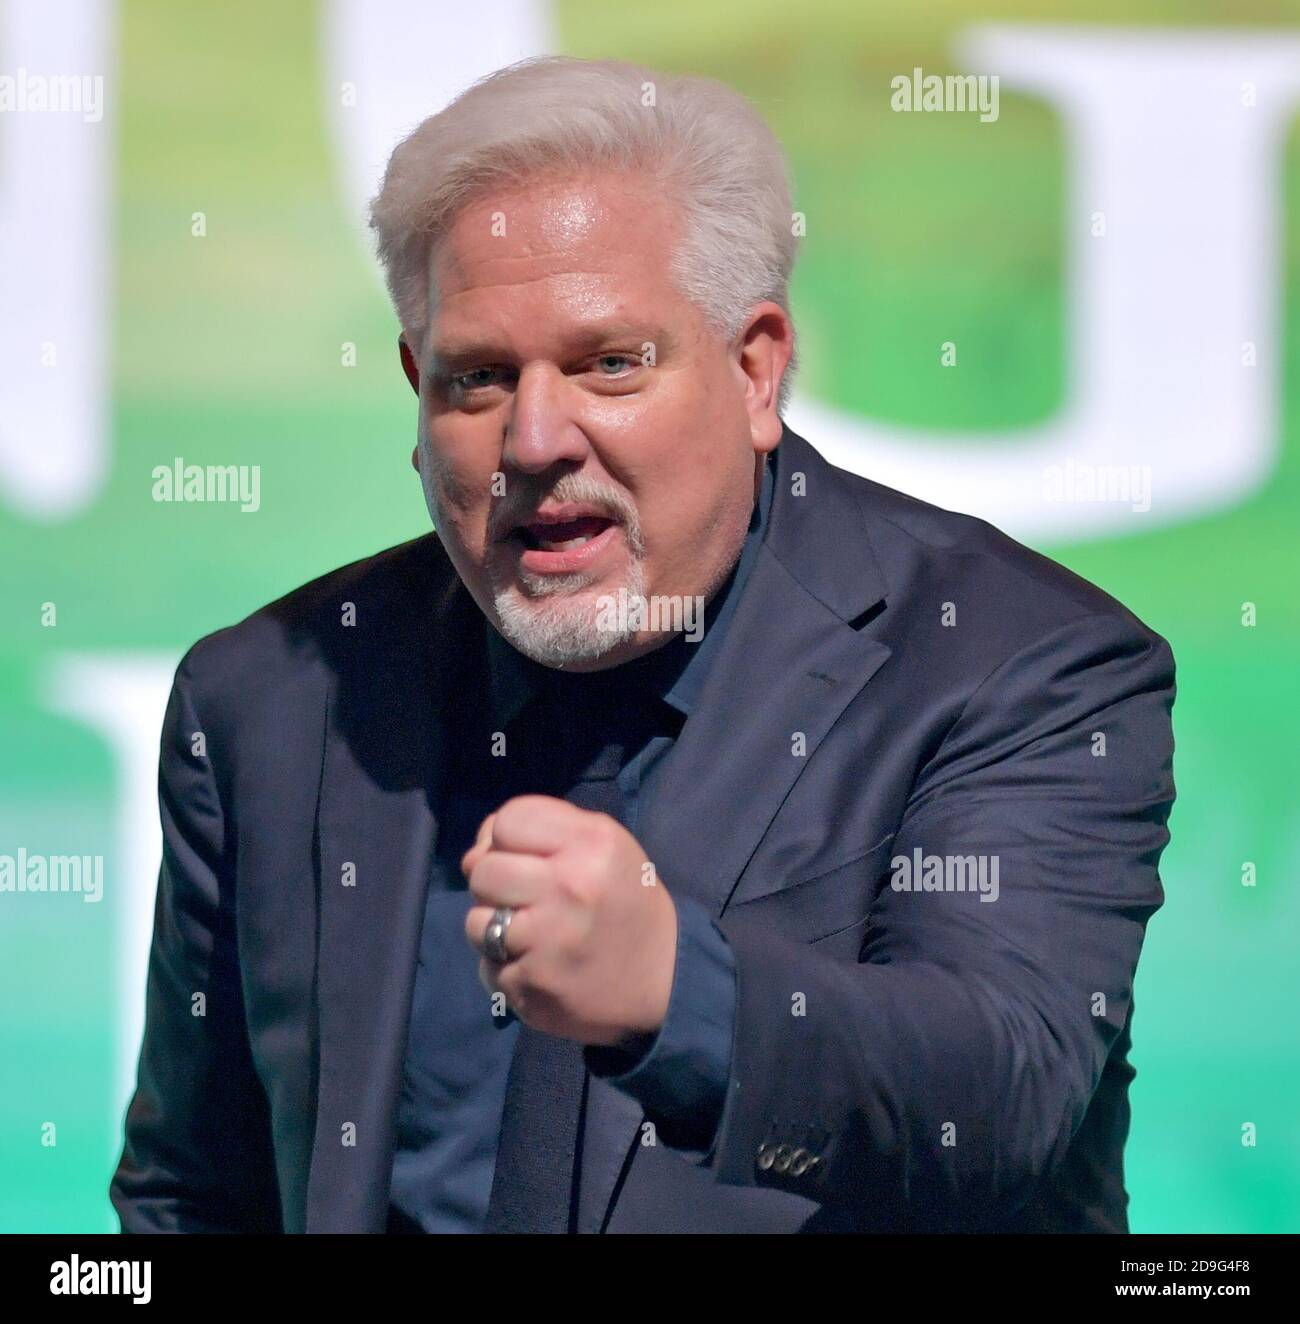 WEST PALM BEACH, FL - DECEMBER 19: Glenn Beck speaks at the 2019 Turning Point USA Student Action Summit - Day 1 at the Palm Beach County Convention Center on December 19, 2019 in West Palm Beach, Florida.   People:  Glenn Beck Stock Photo